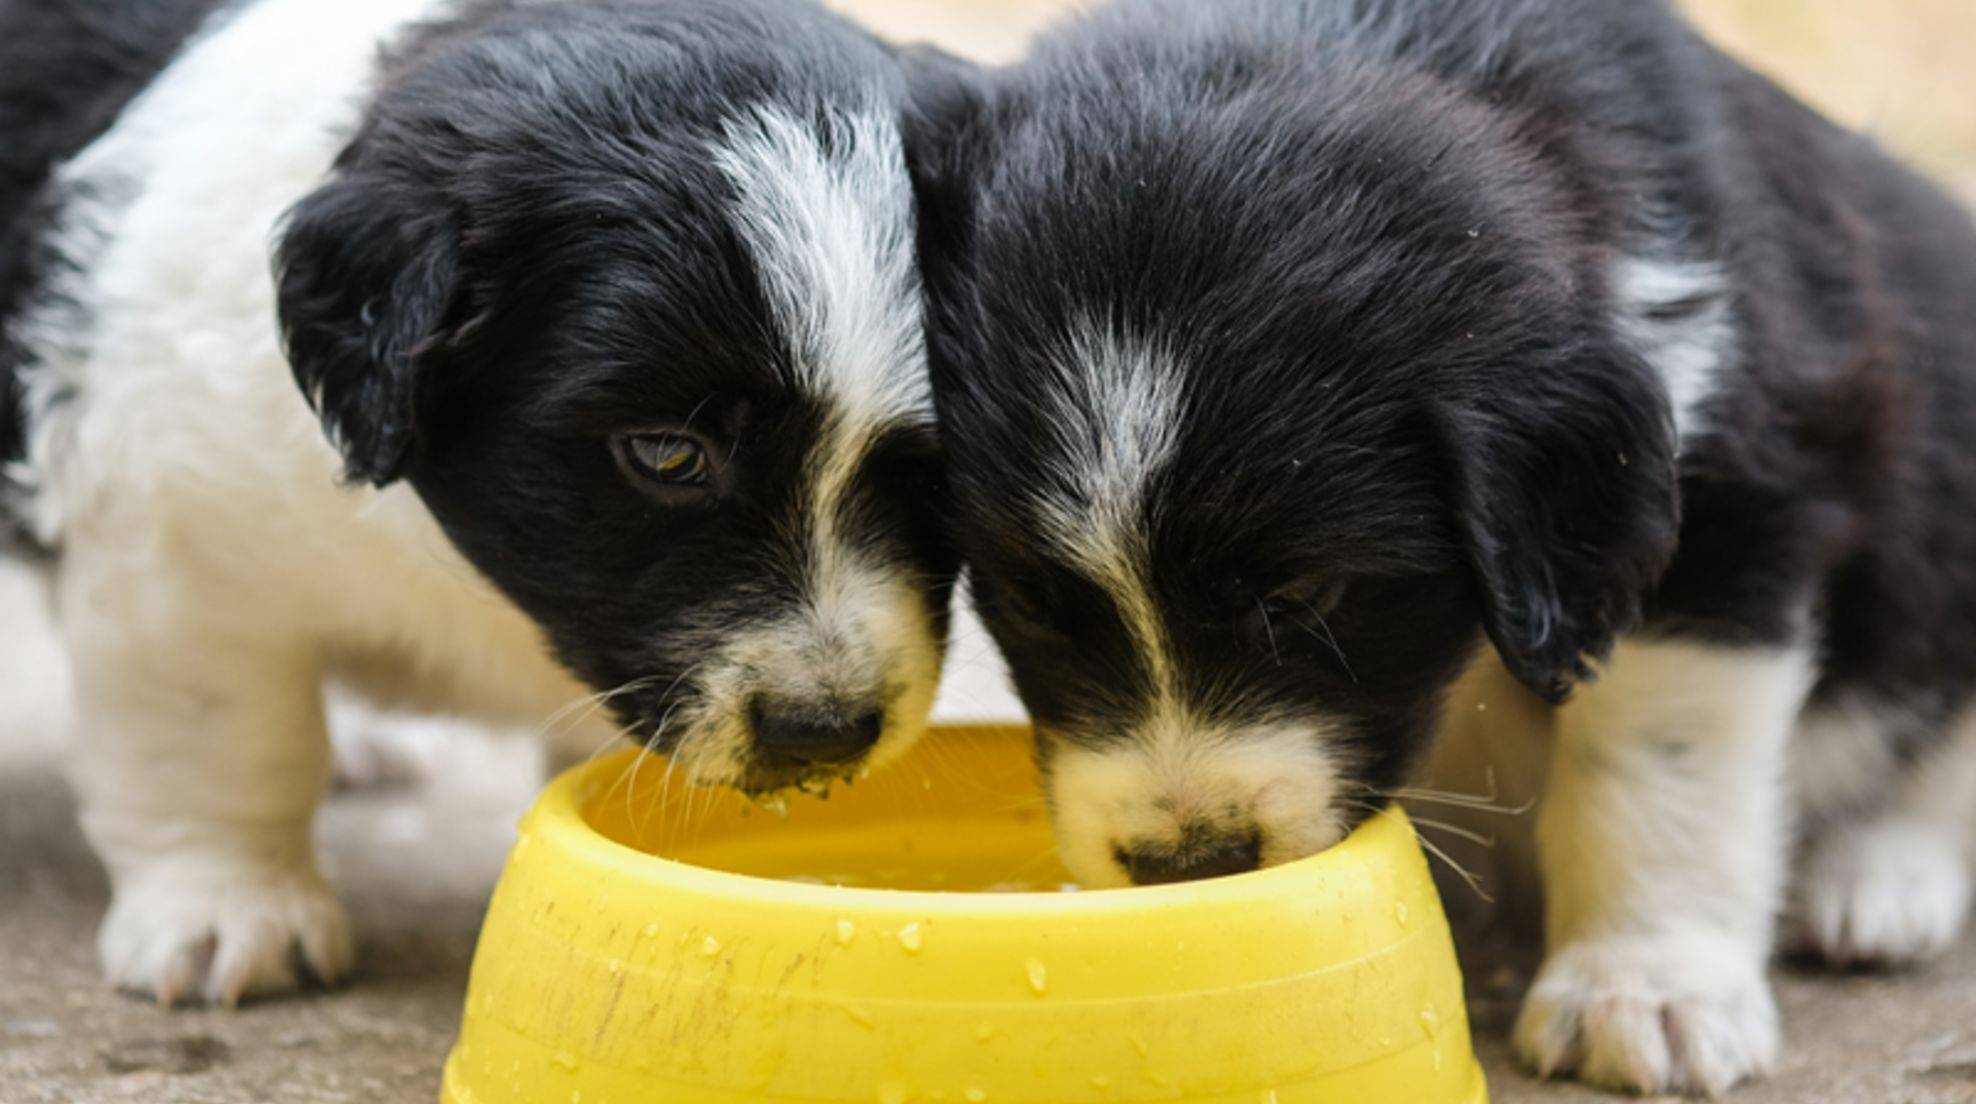 Is it harmful to dogs to share a water bowl?